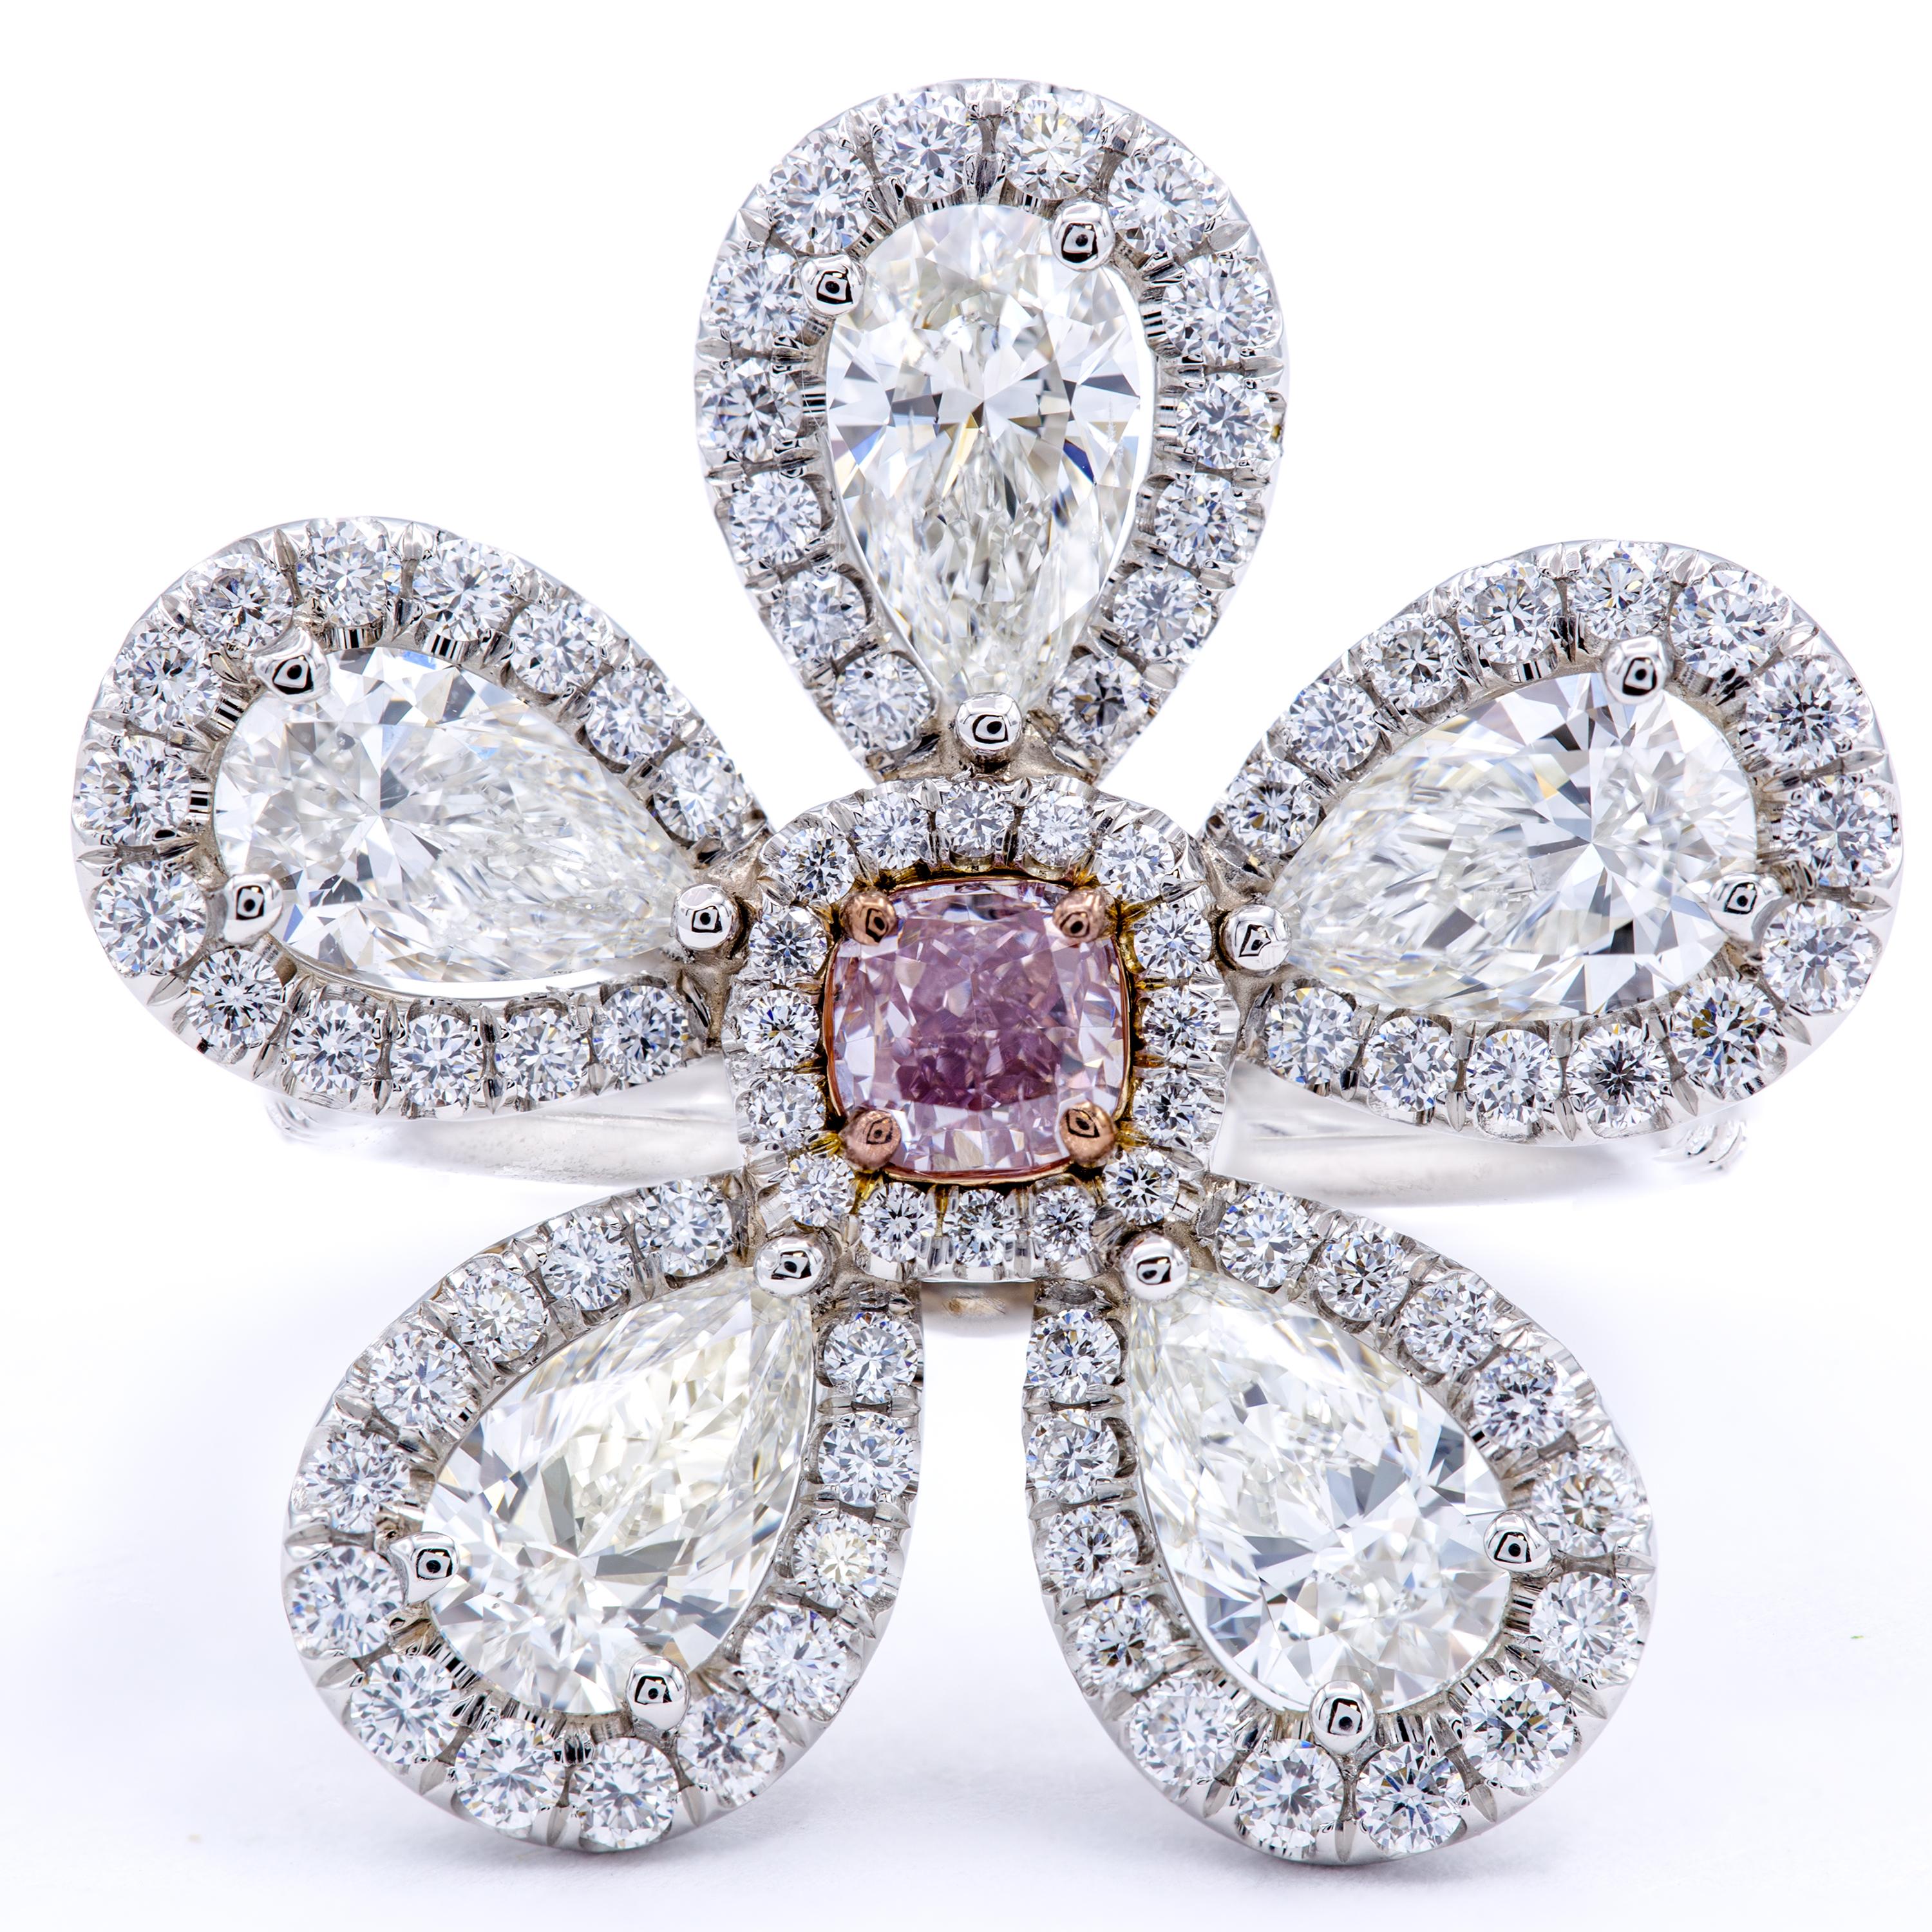 A brilliant bouquet of hand selected diamonds carries a beautiful display of pear shaped diamond petals and a GIA certified natural fancy purplish pink center stone. The band combines pure platinum with 18Kt rose gold and sets over a carat of